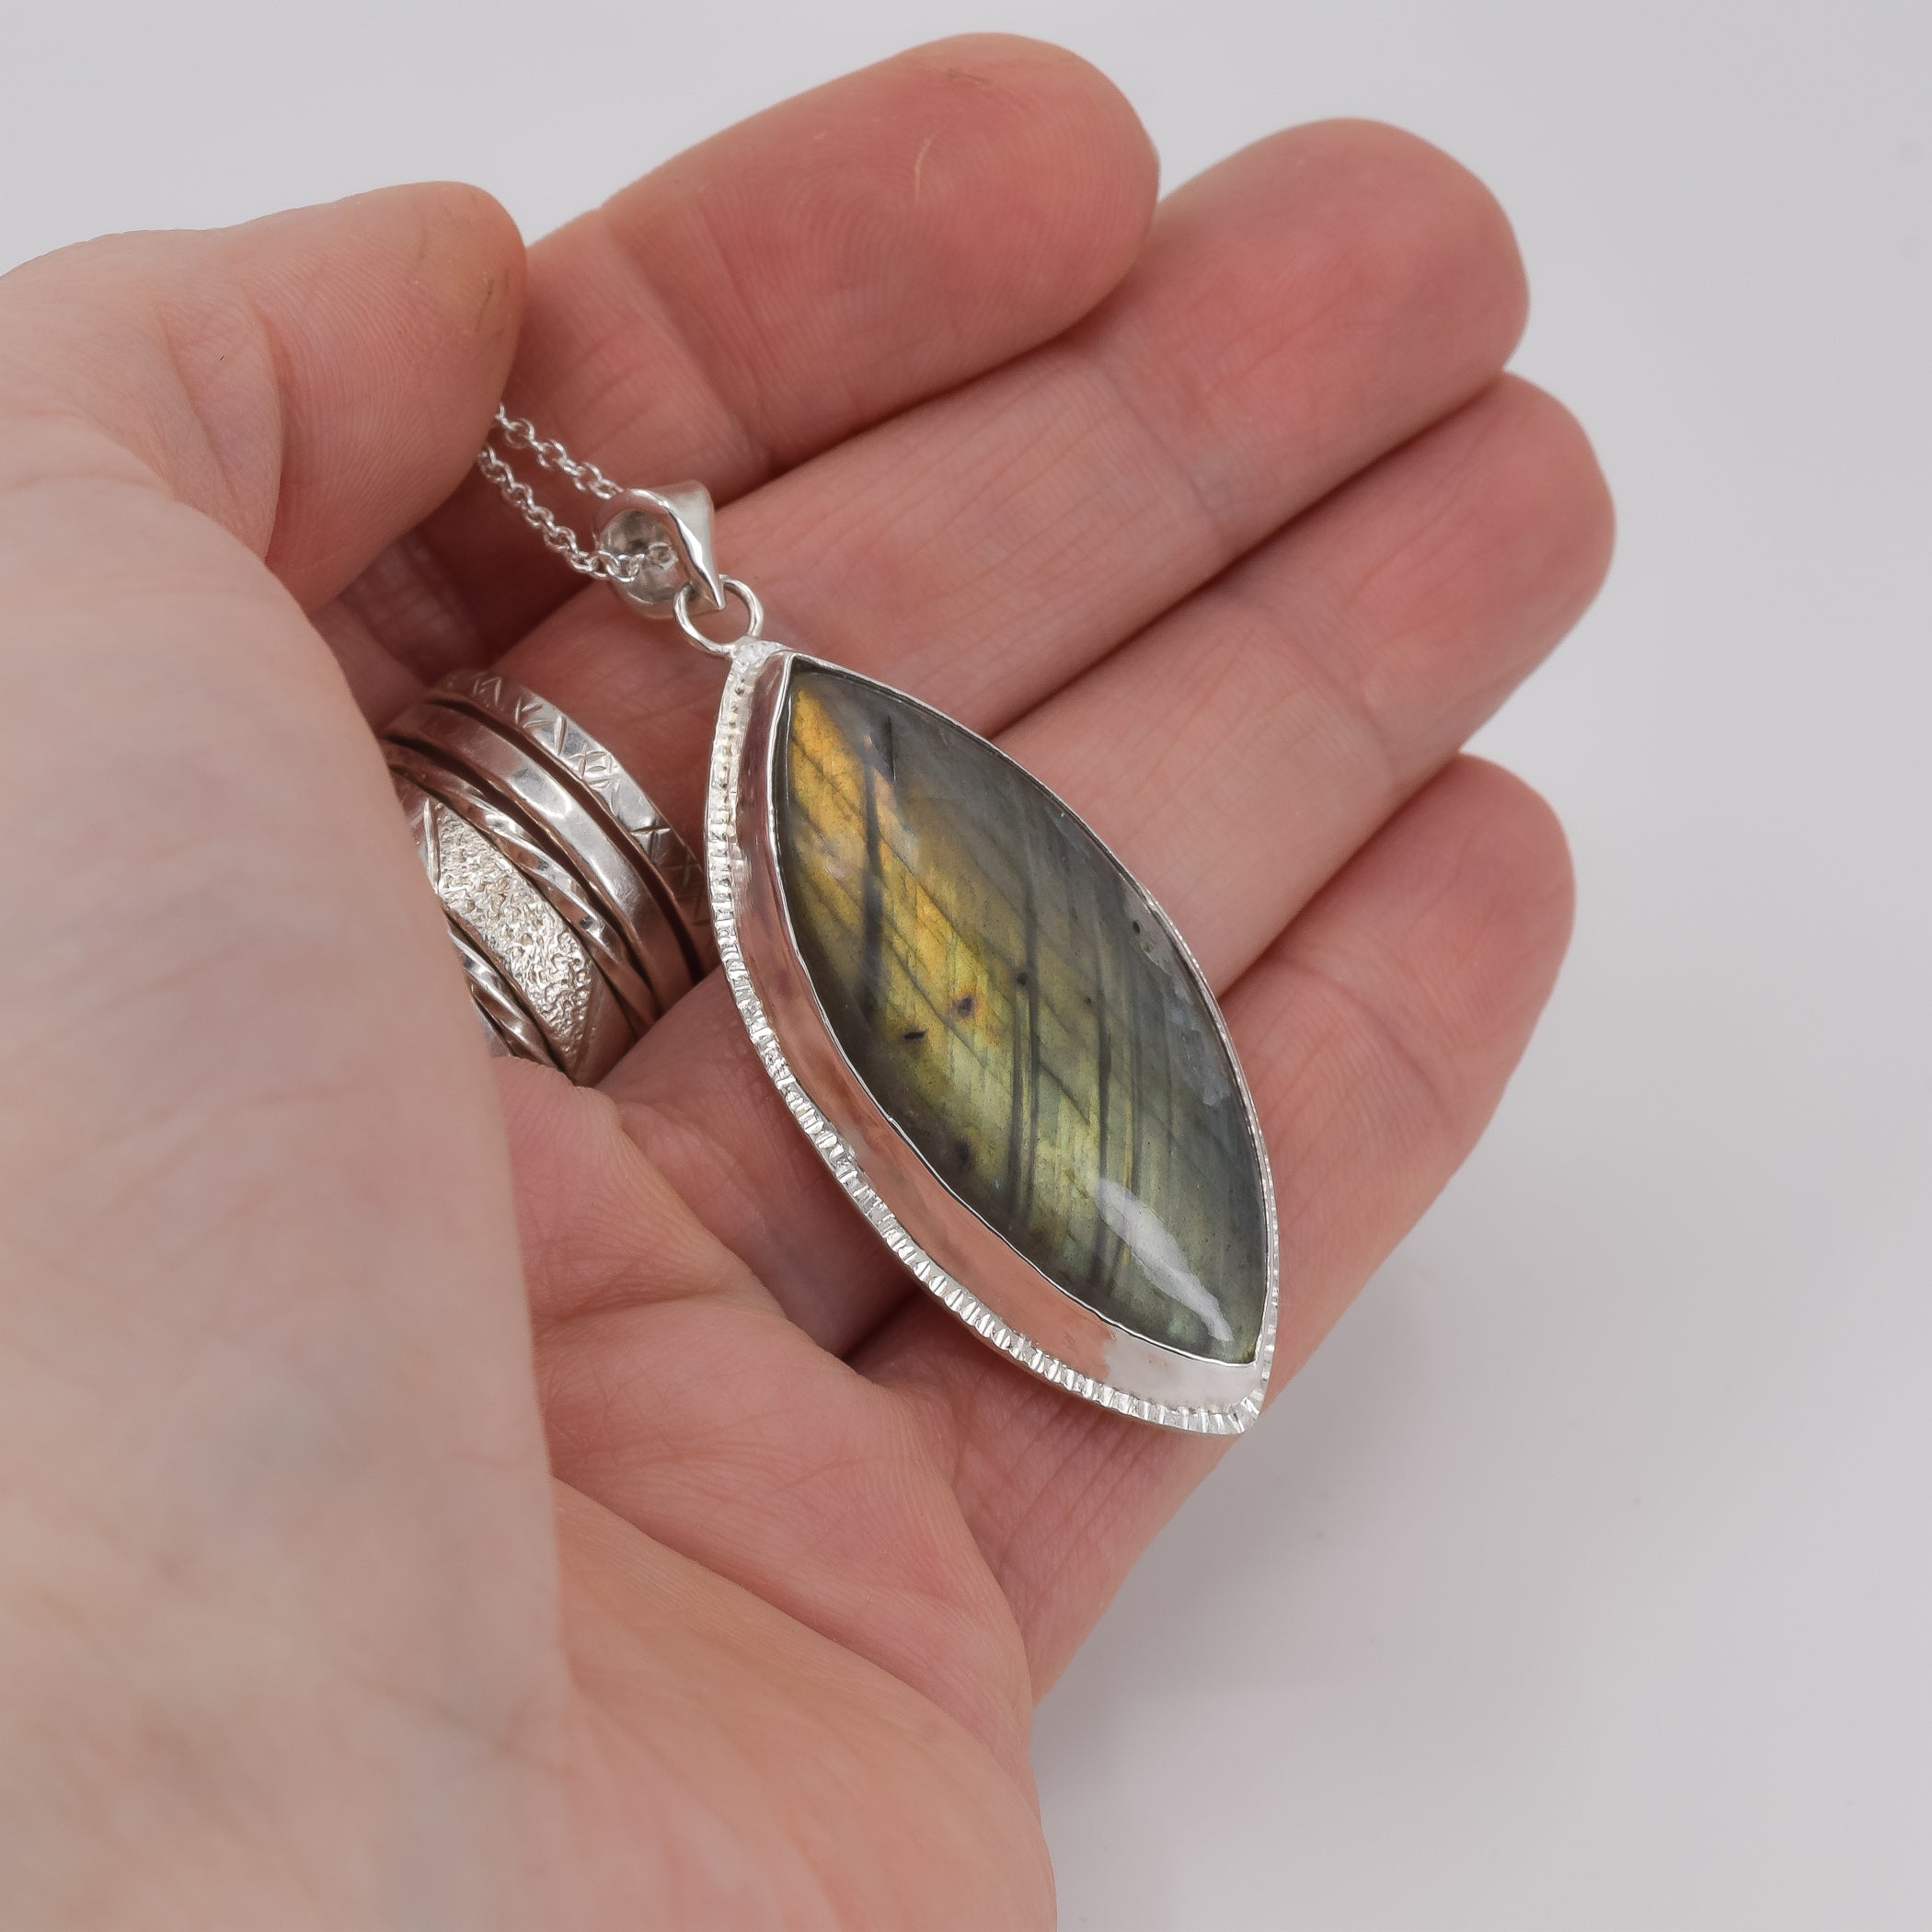 Yellow and green labradorite sterling silver pendant necklace held in hand